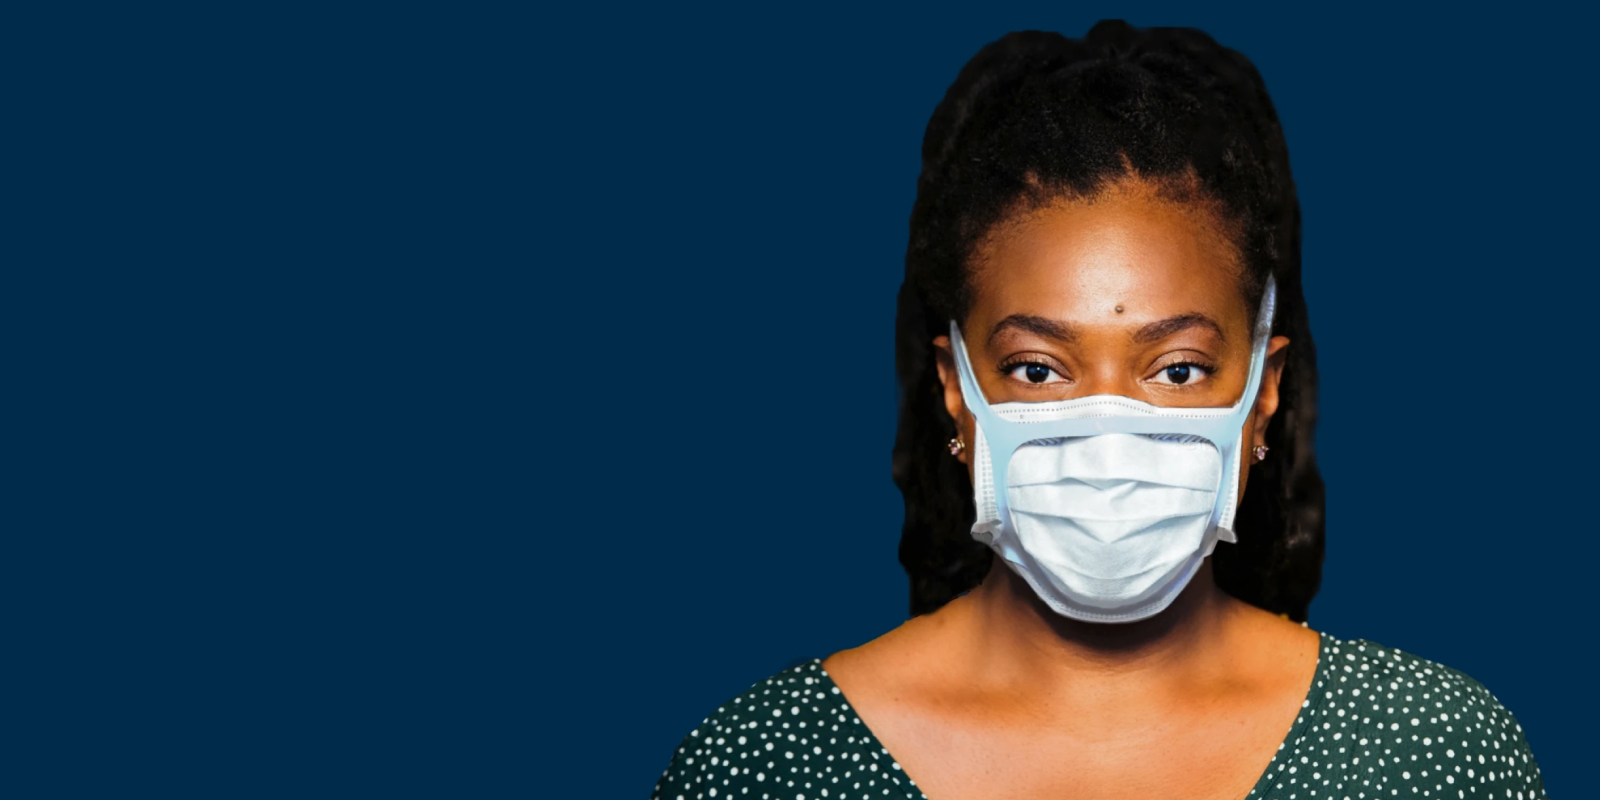 Fix The Mask uses Qualio+ to market a medical device in record time mid-pandemic